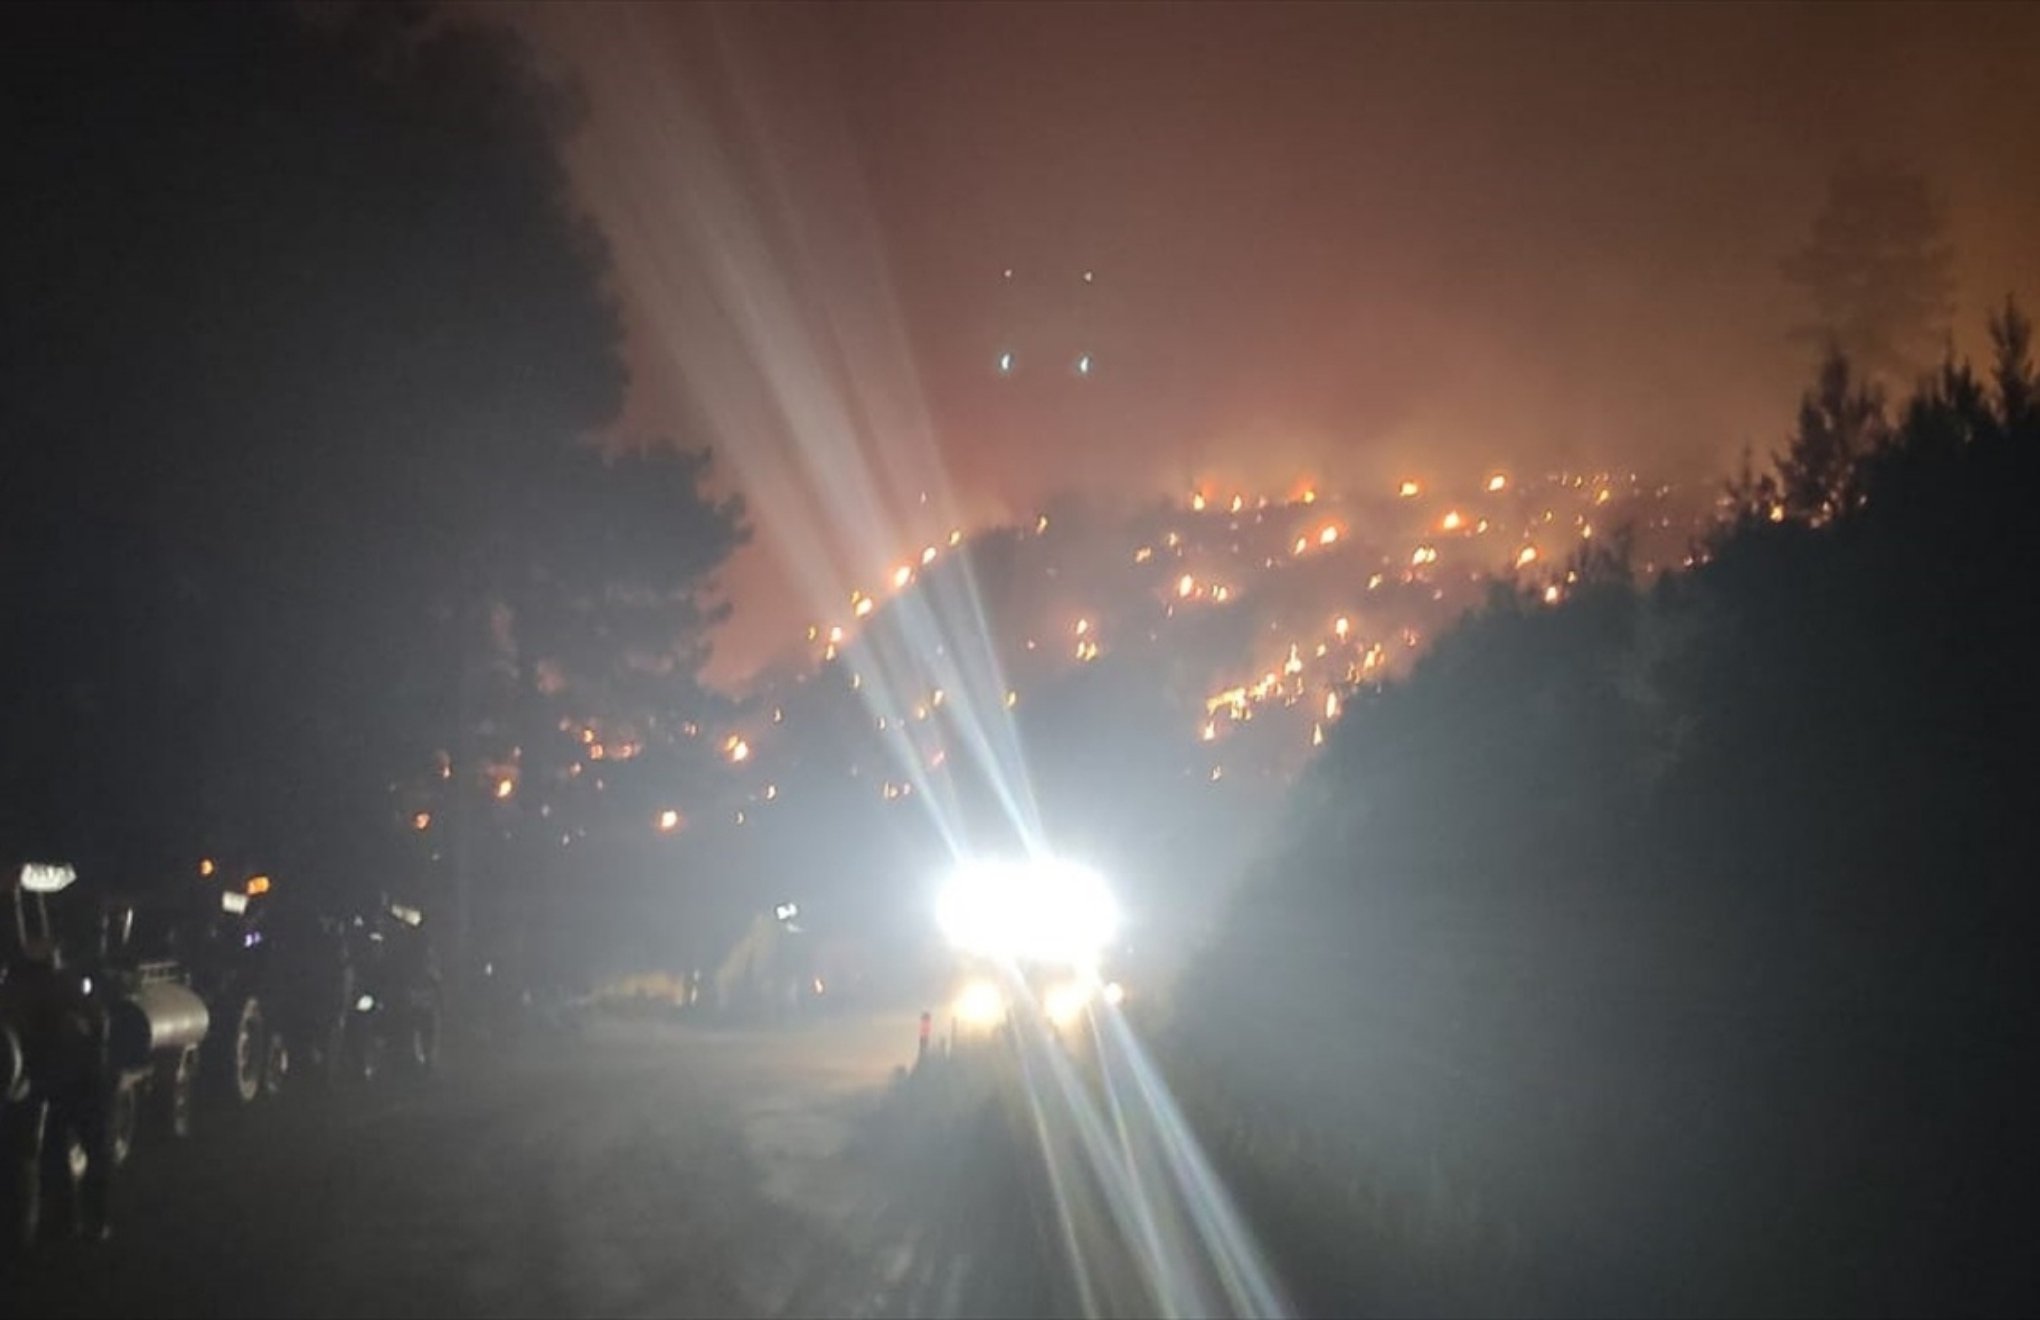 174 forest fires in 39 provinces in 8 days: 14 fires still raging